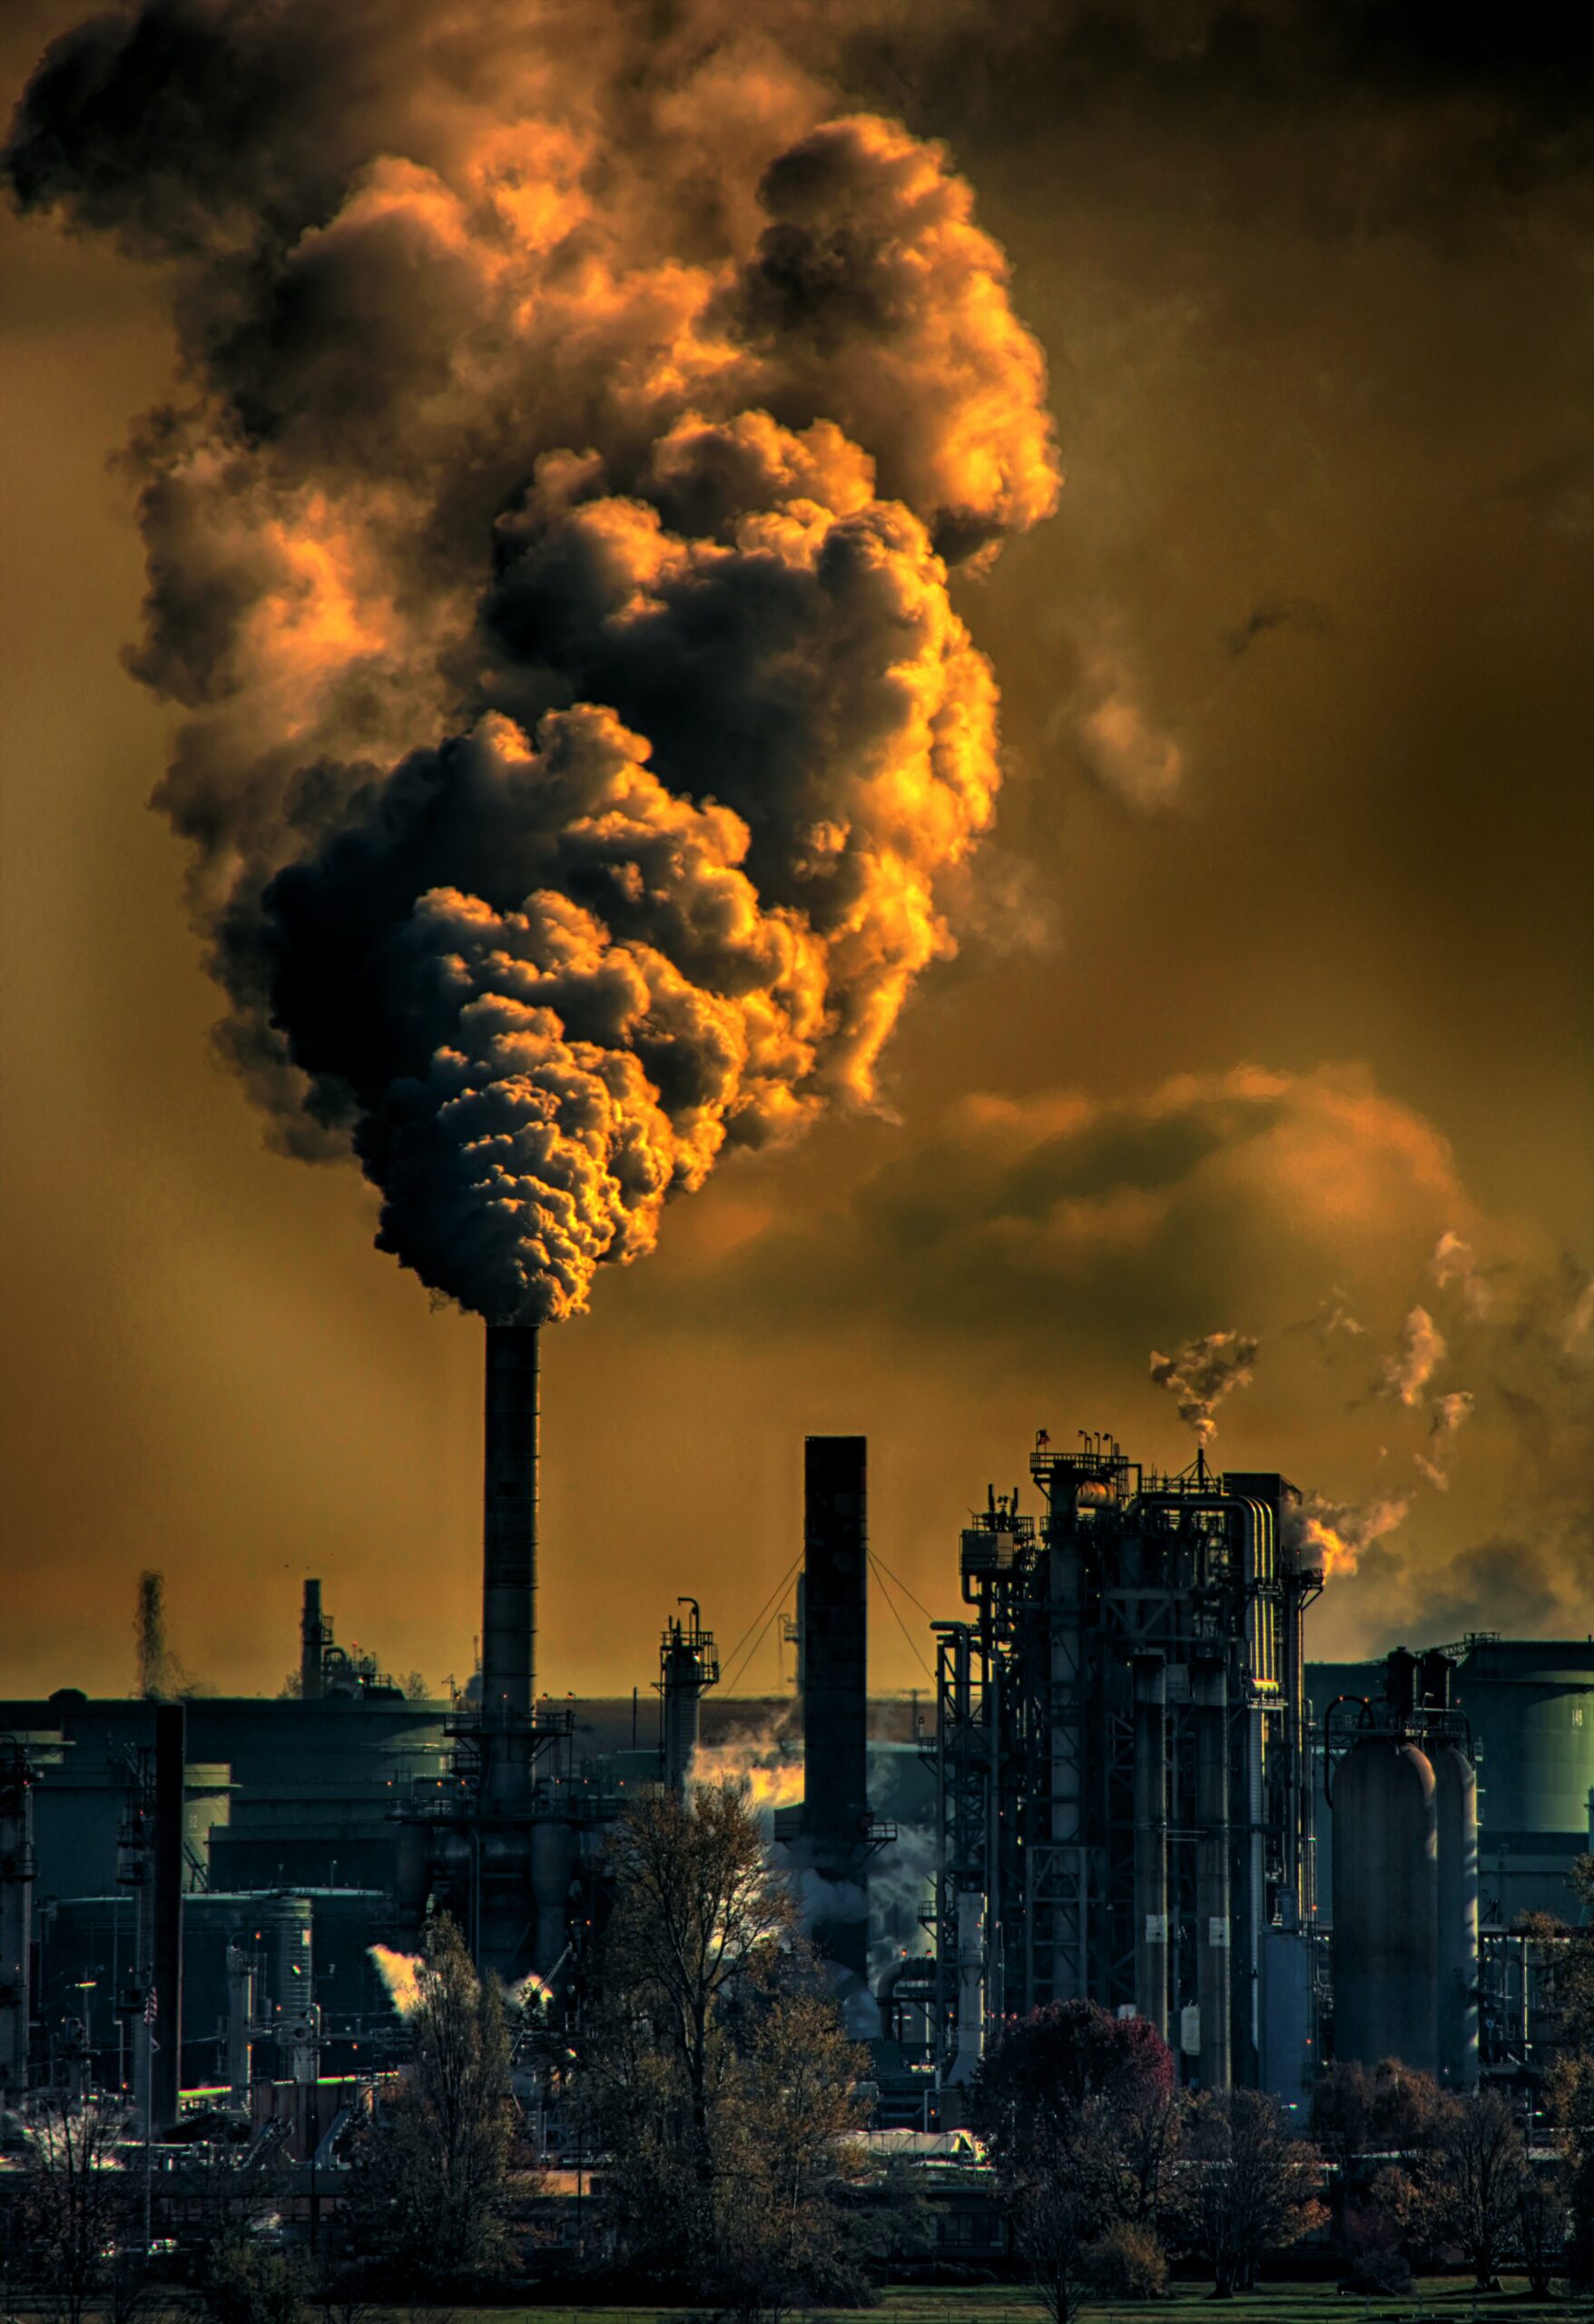 What Type of Pollution Includes CFCs and Smog?